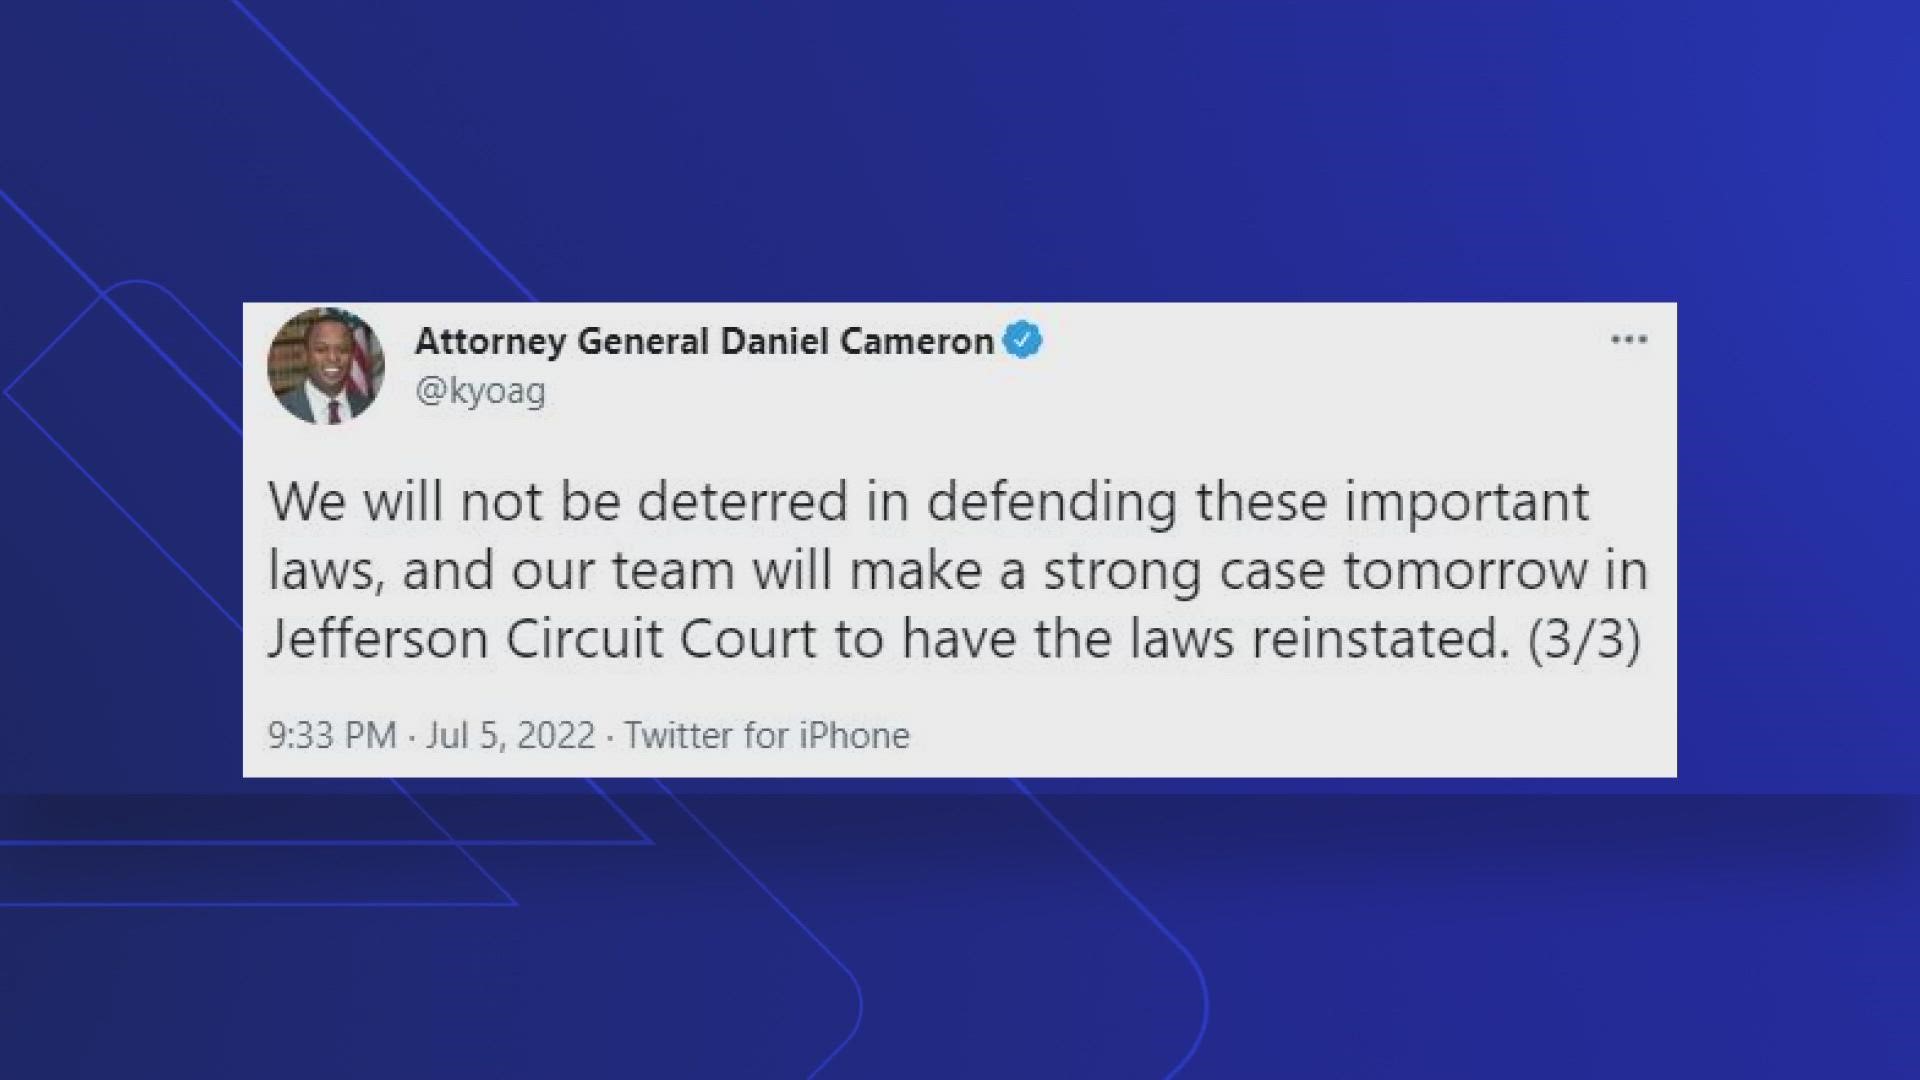 Cameron called the ruling "disappointing" but said he will fight to reinstate the Heartbeat Law in Jefferson Circuit Court.